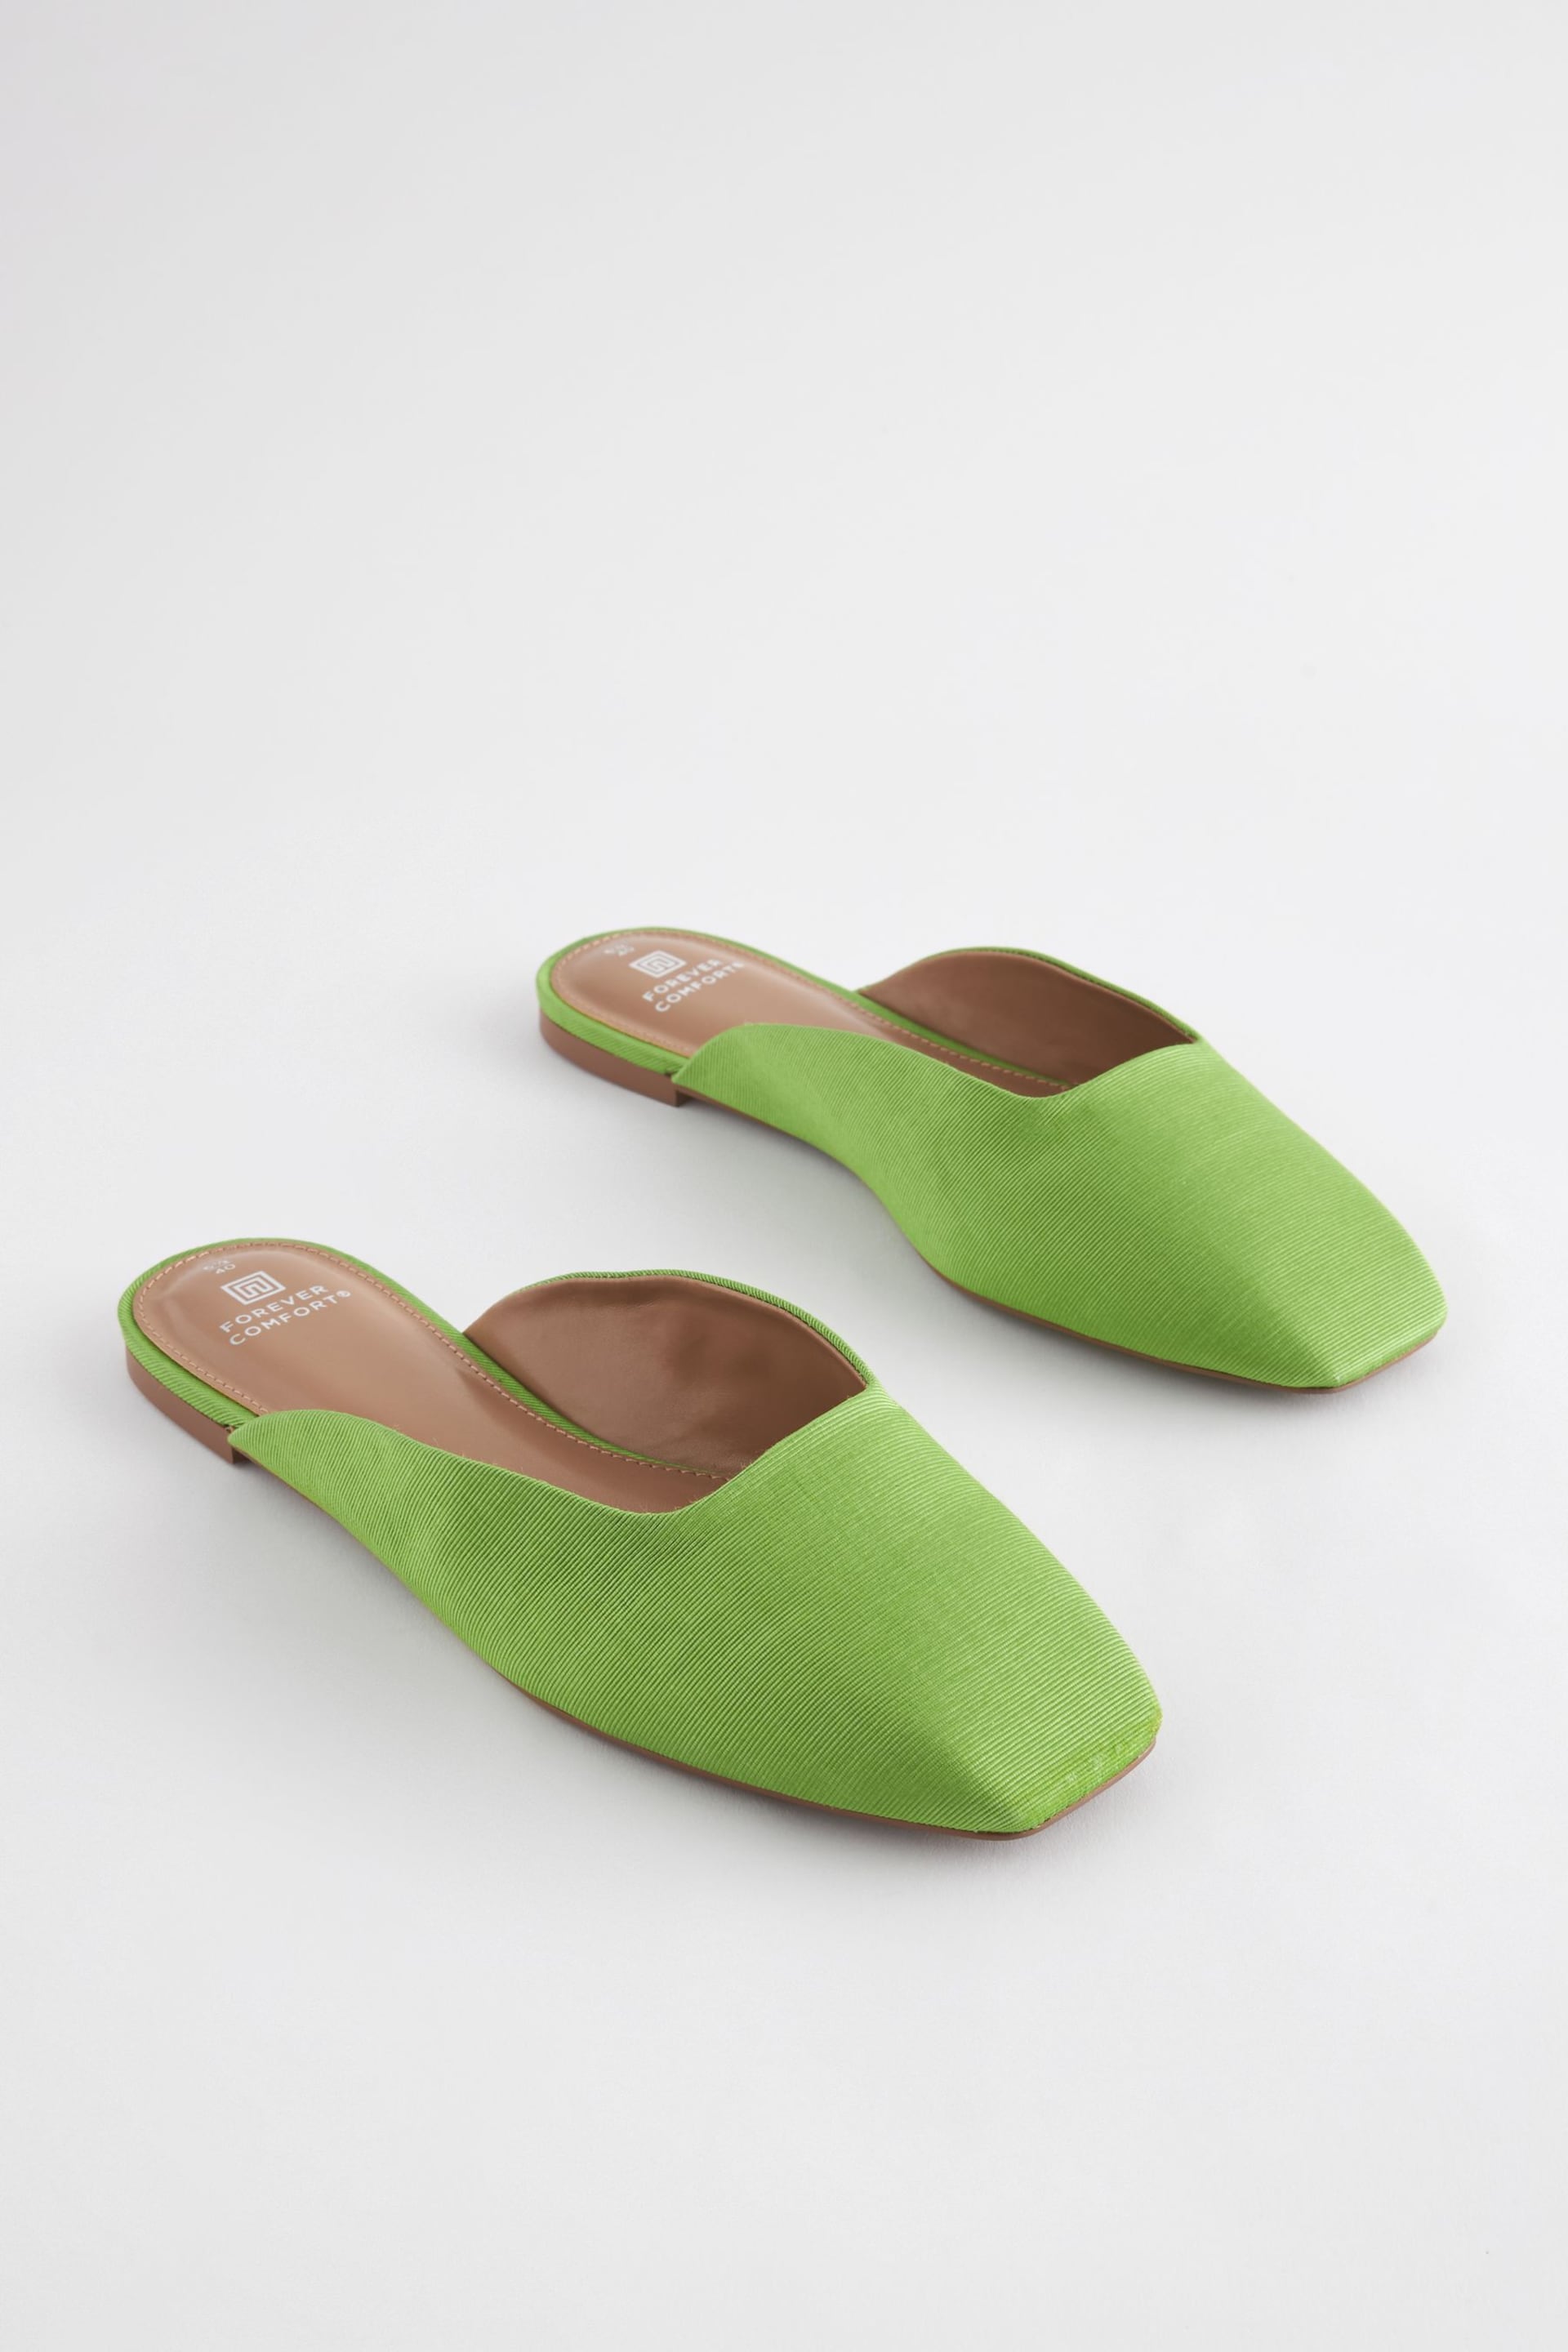 Green Forever Comfort® Square Toe Mules - Image 4 of 8